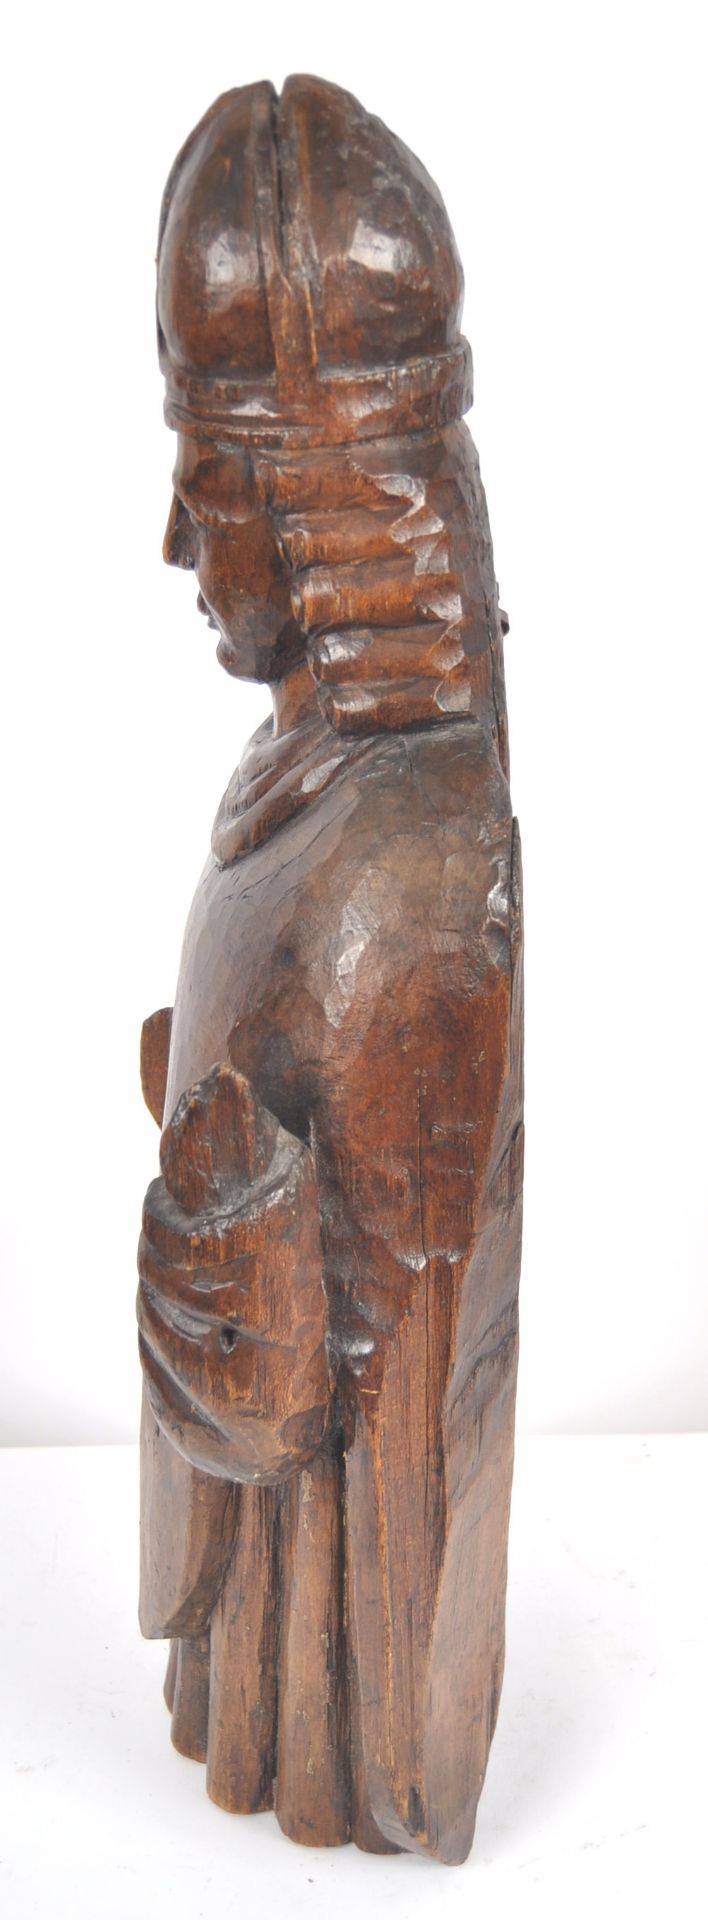 19TH CENTURY OAK CARVED RELGIOUS FIGURE - Image 5 of 5